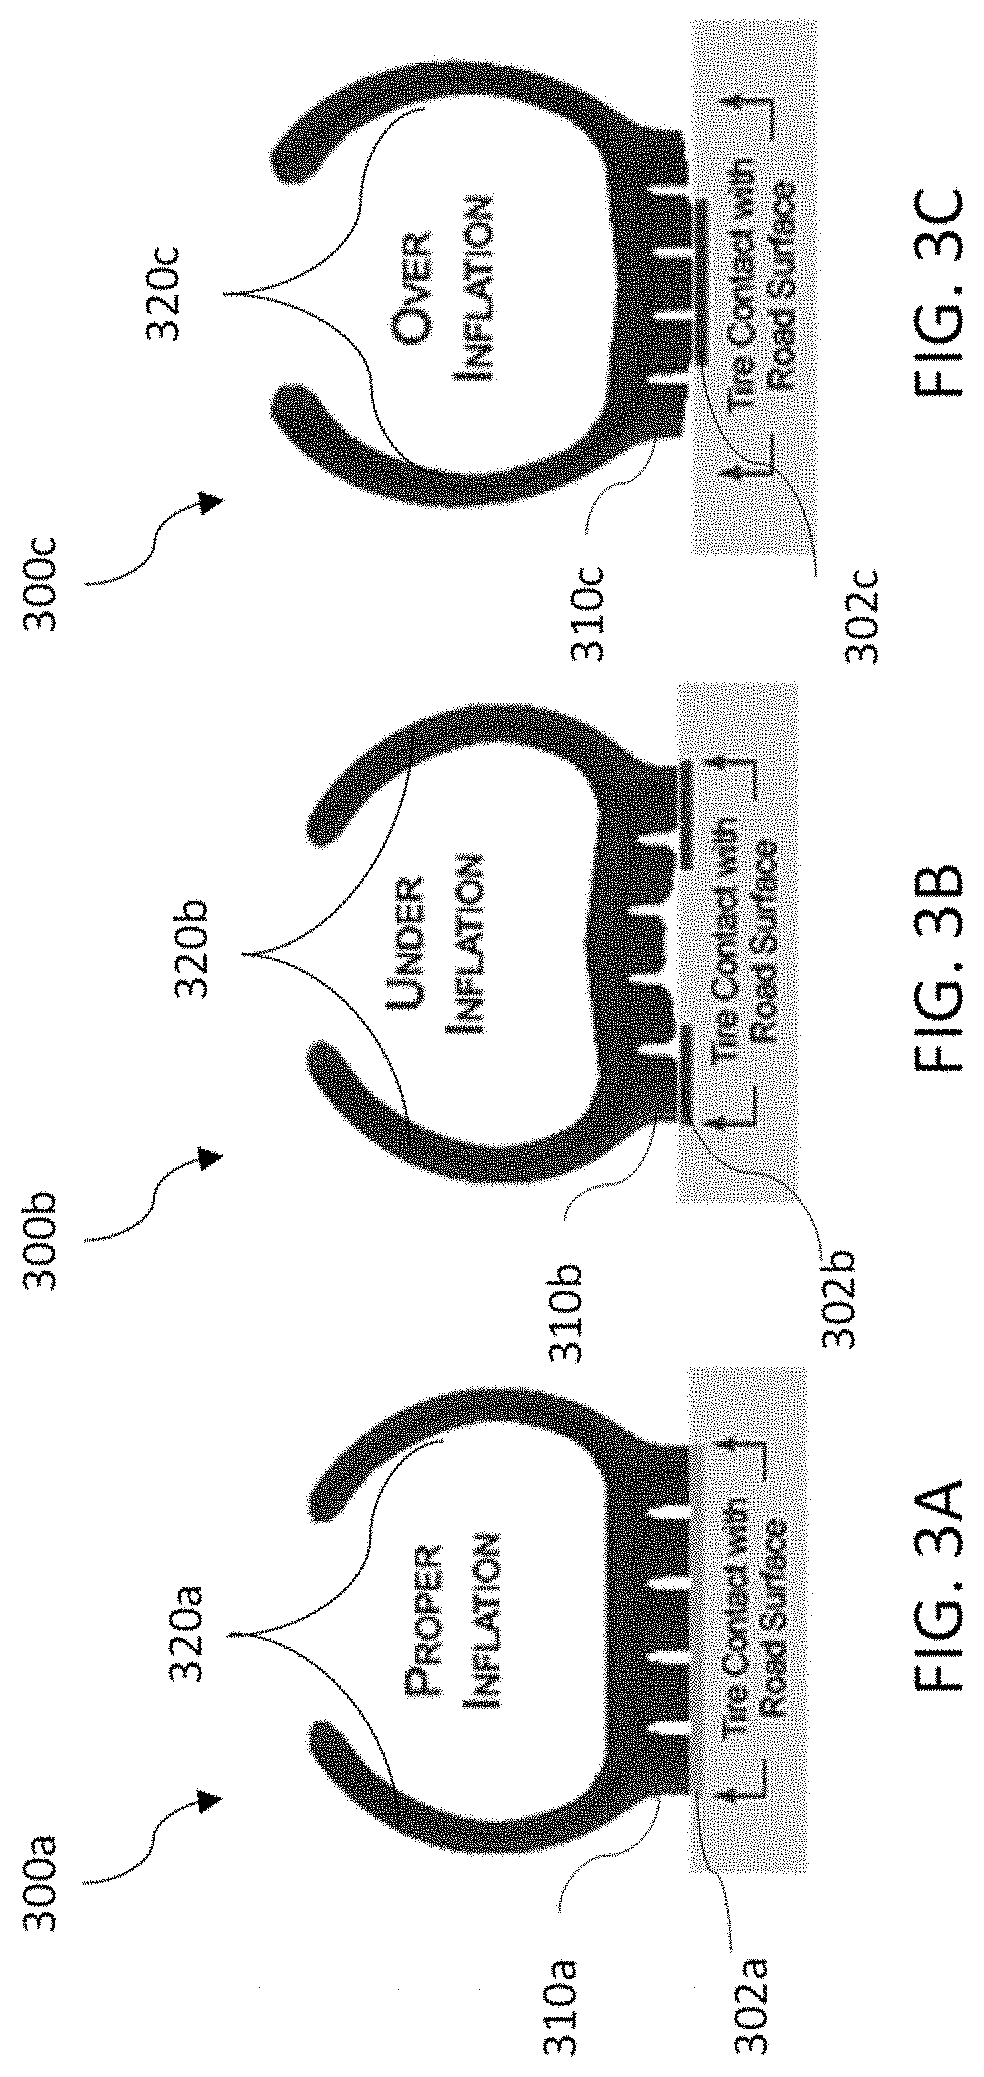 Vehicle tire pressure learning system and method